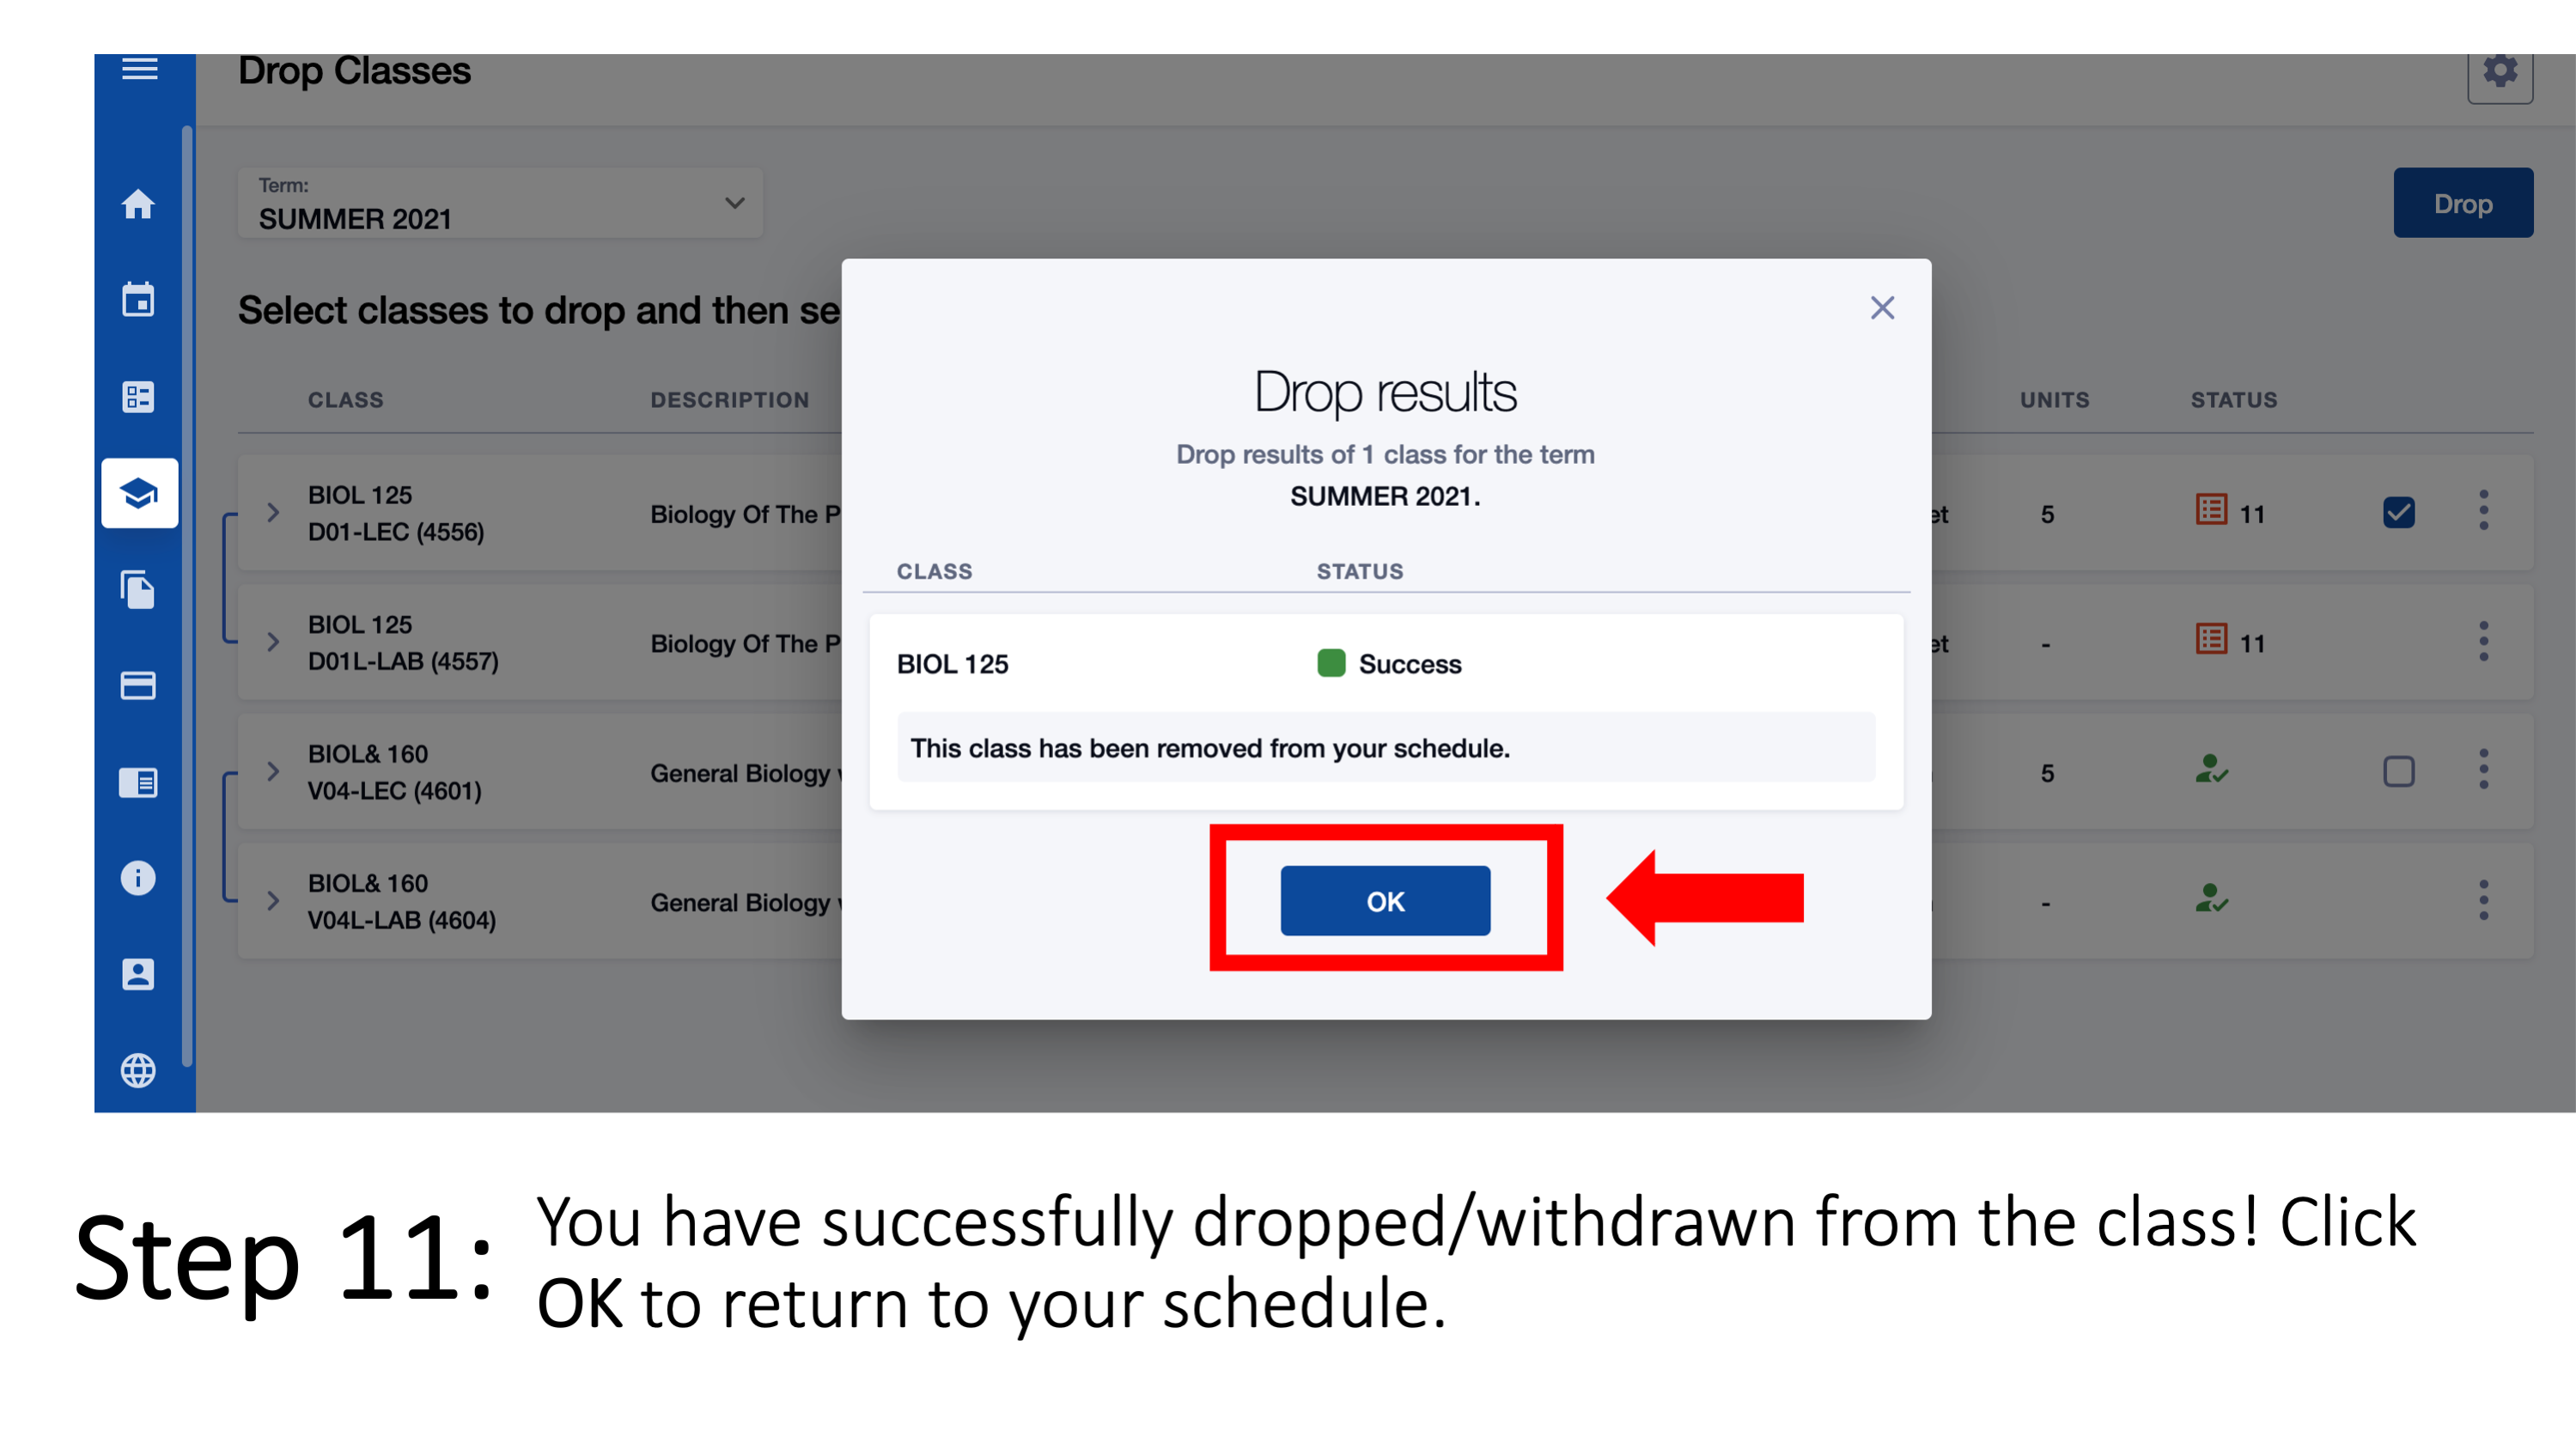 Step 11: You have successfully dropped/withdrawn from the class! Click OK to return to your schedule.